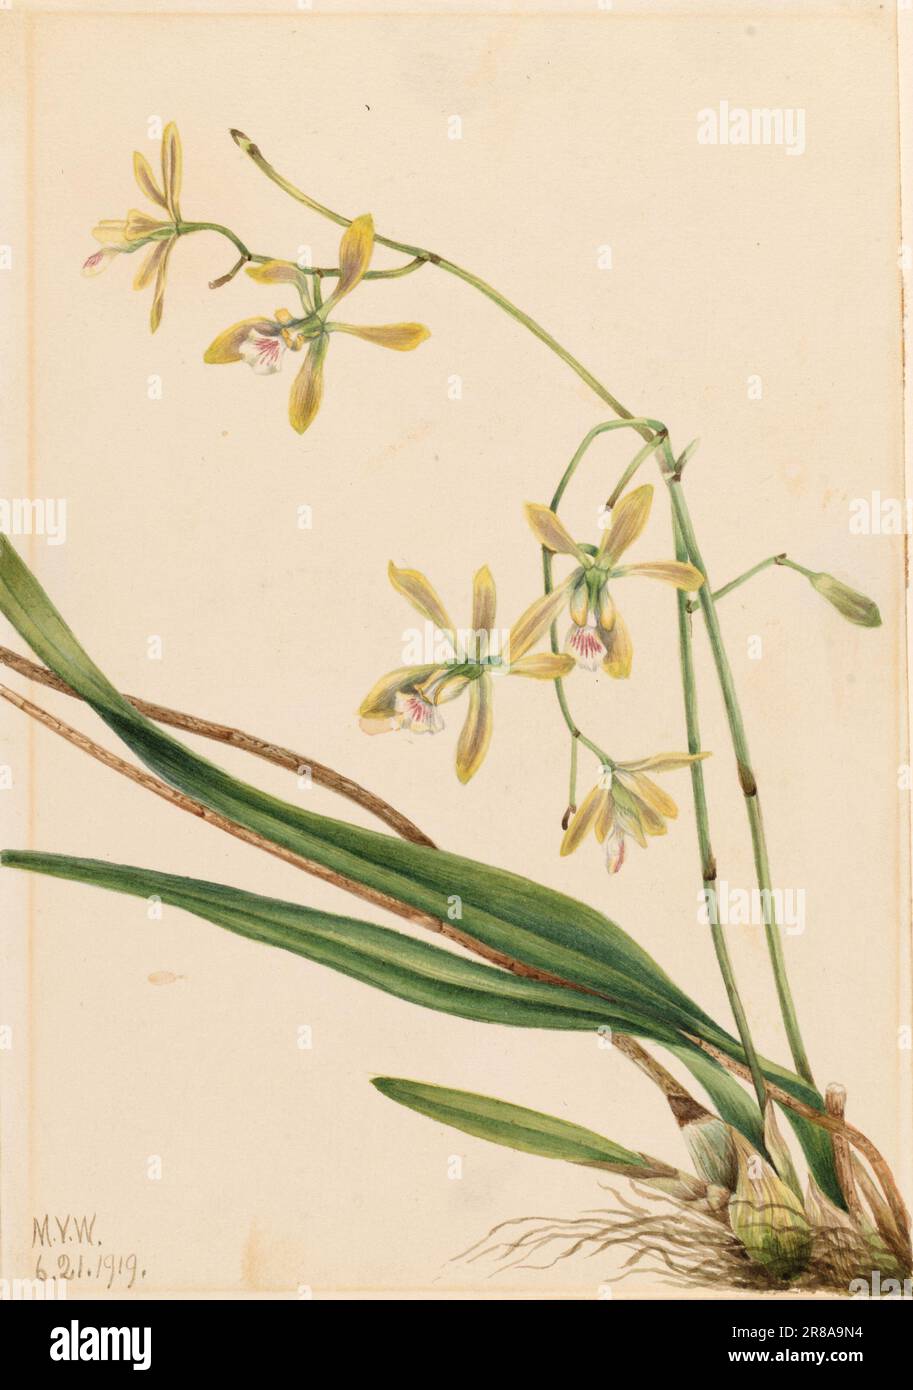 Tampa Epidendrum (Epidendrum tampense) 1919 by Mary Vaux Walcott, born Philadelphia, PA 1860-died St. Andrews, New Brunswick, Canada 1940 Stock Photo